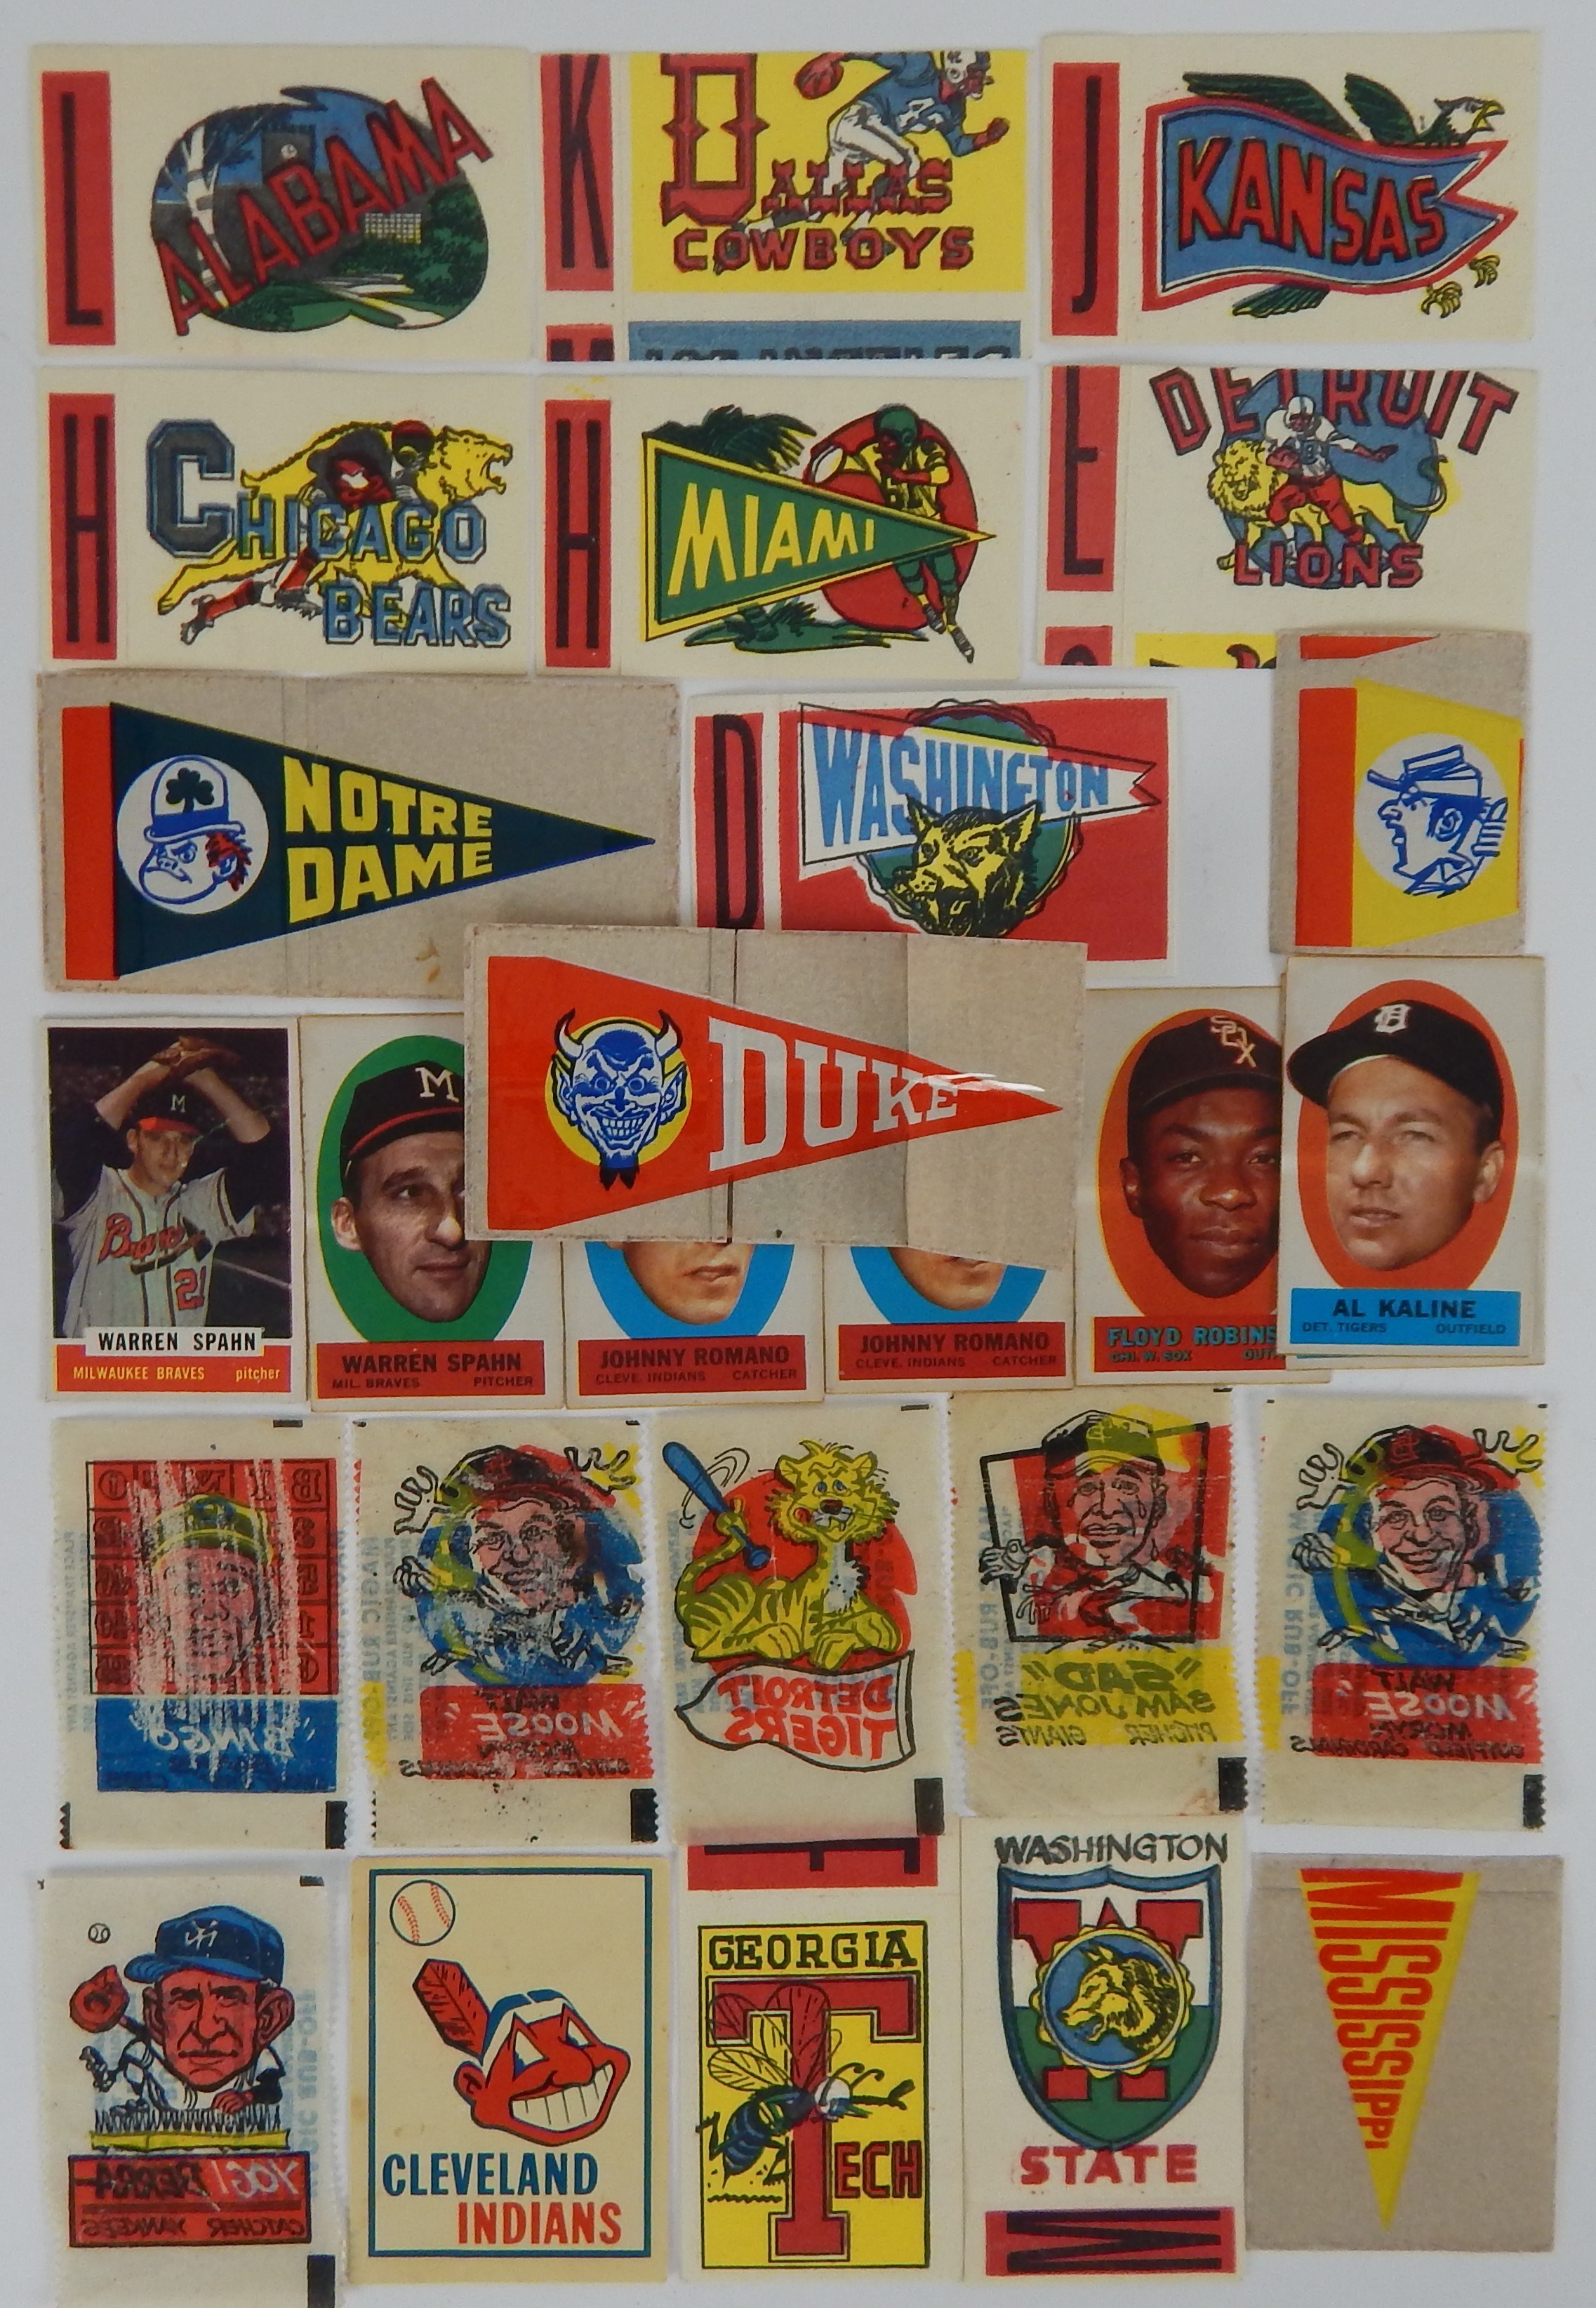 Baseball and Trading Cards - 1960's Topps & Fleer Inserts (27)